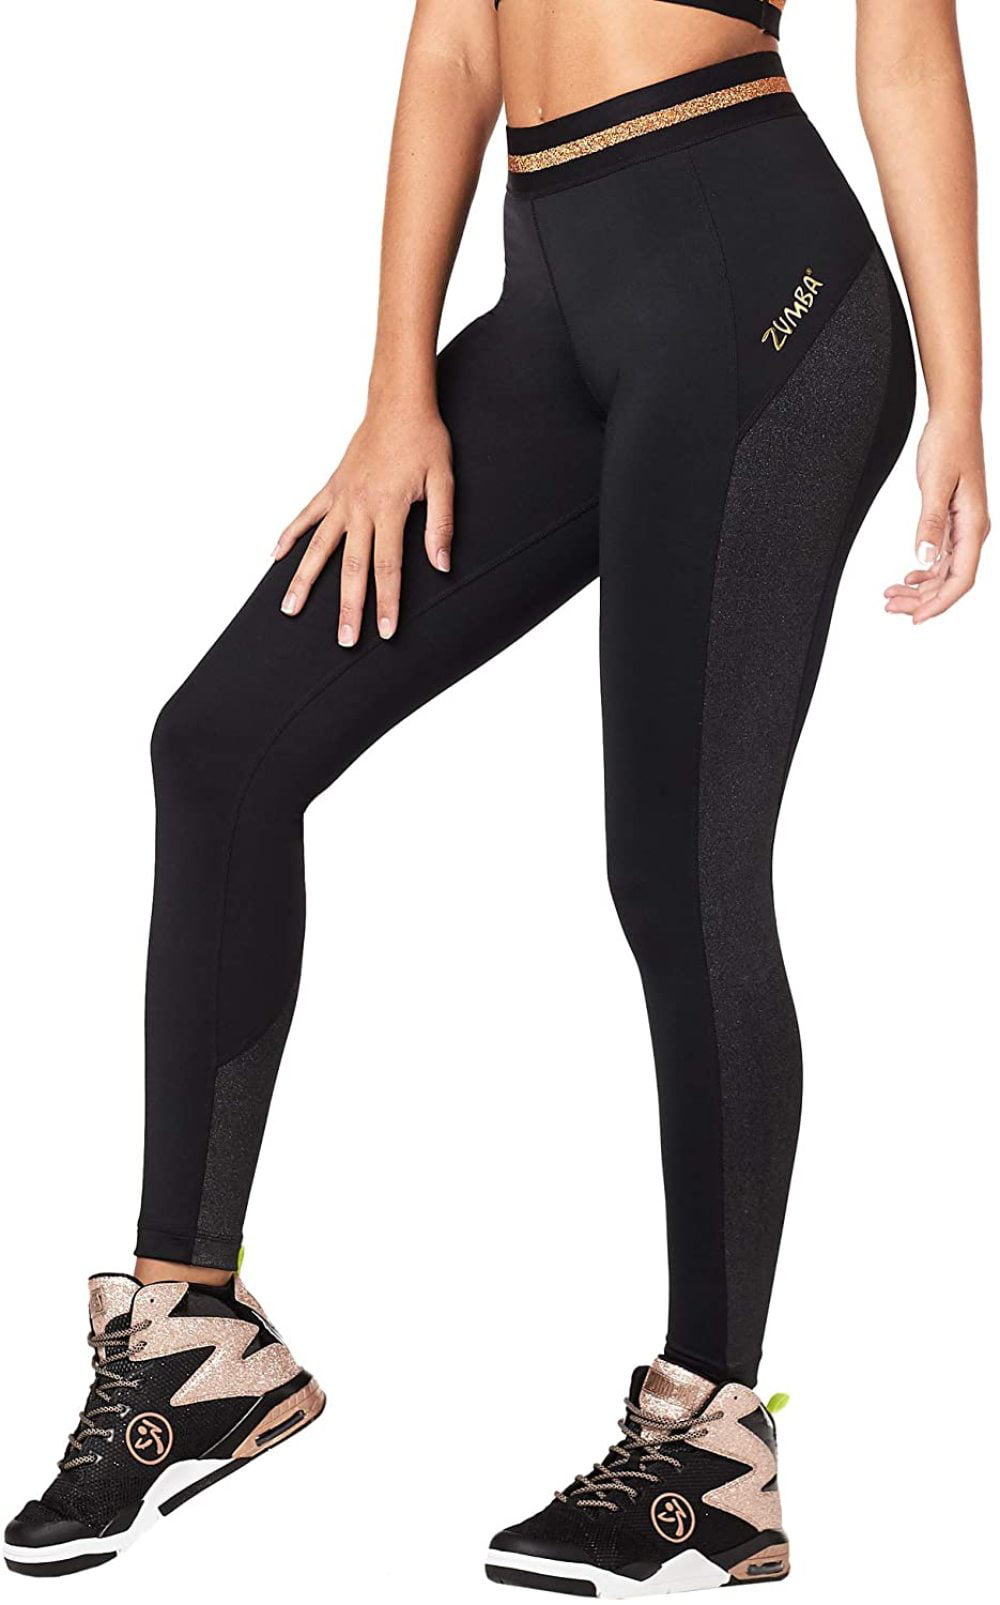 Bold Black 3 X-Large STRONG by Zumba Compression High Waisted Athletic Workout Leggings for Women 